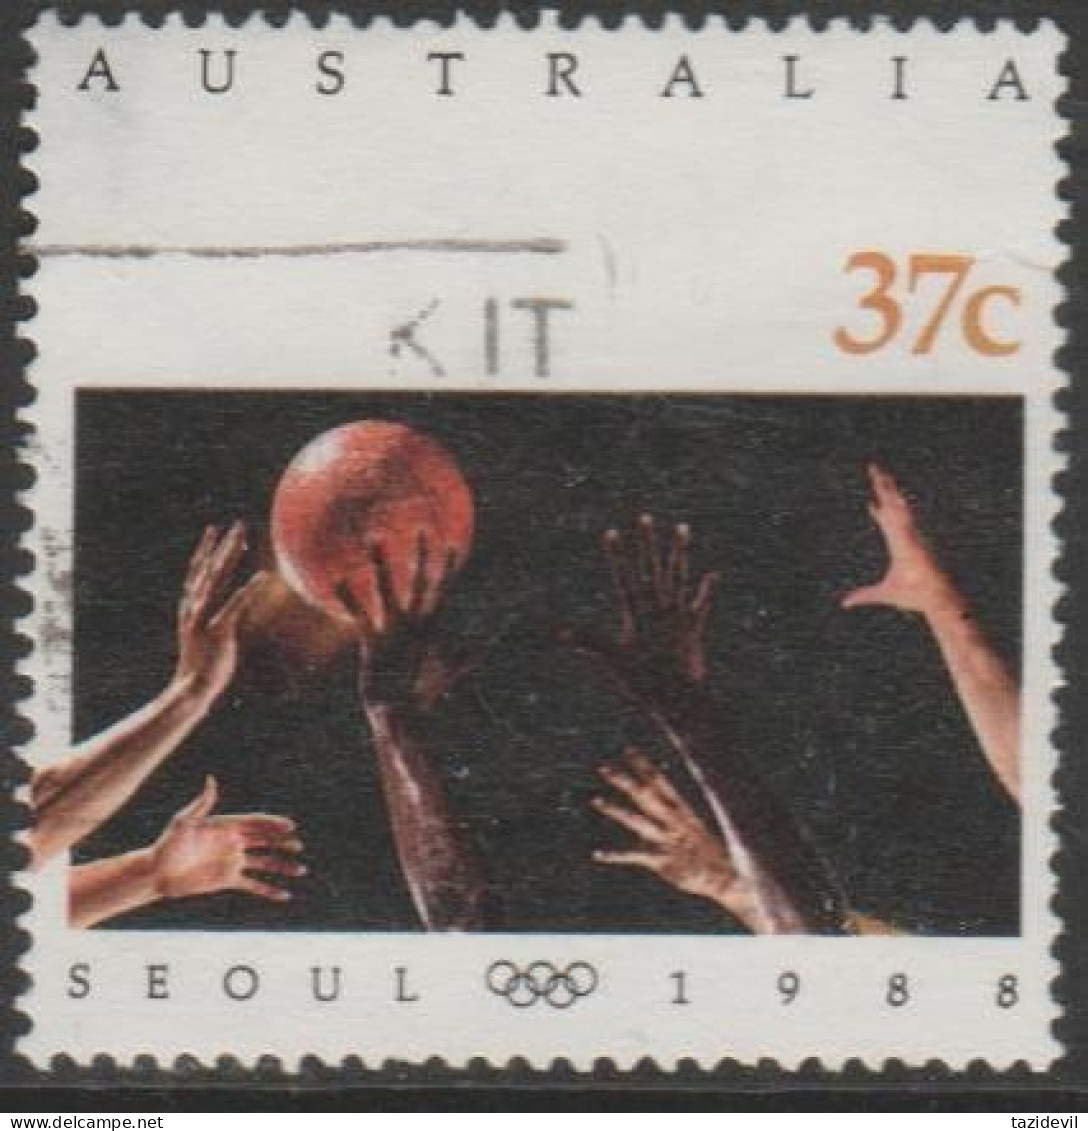 AUSTRALIA - USED - 1988 37c Seoul Olympic Games - Basketball - Used Stamps